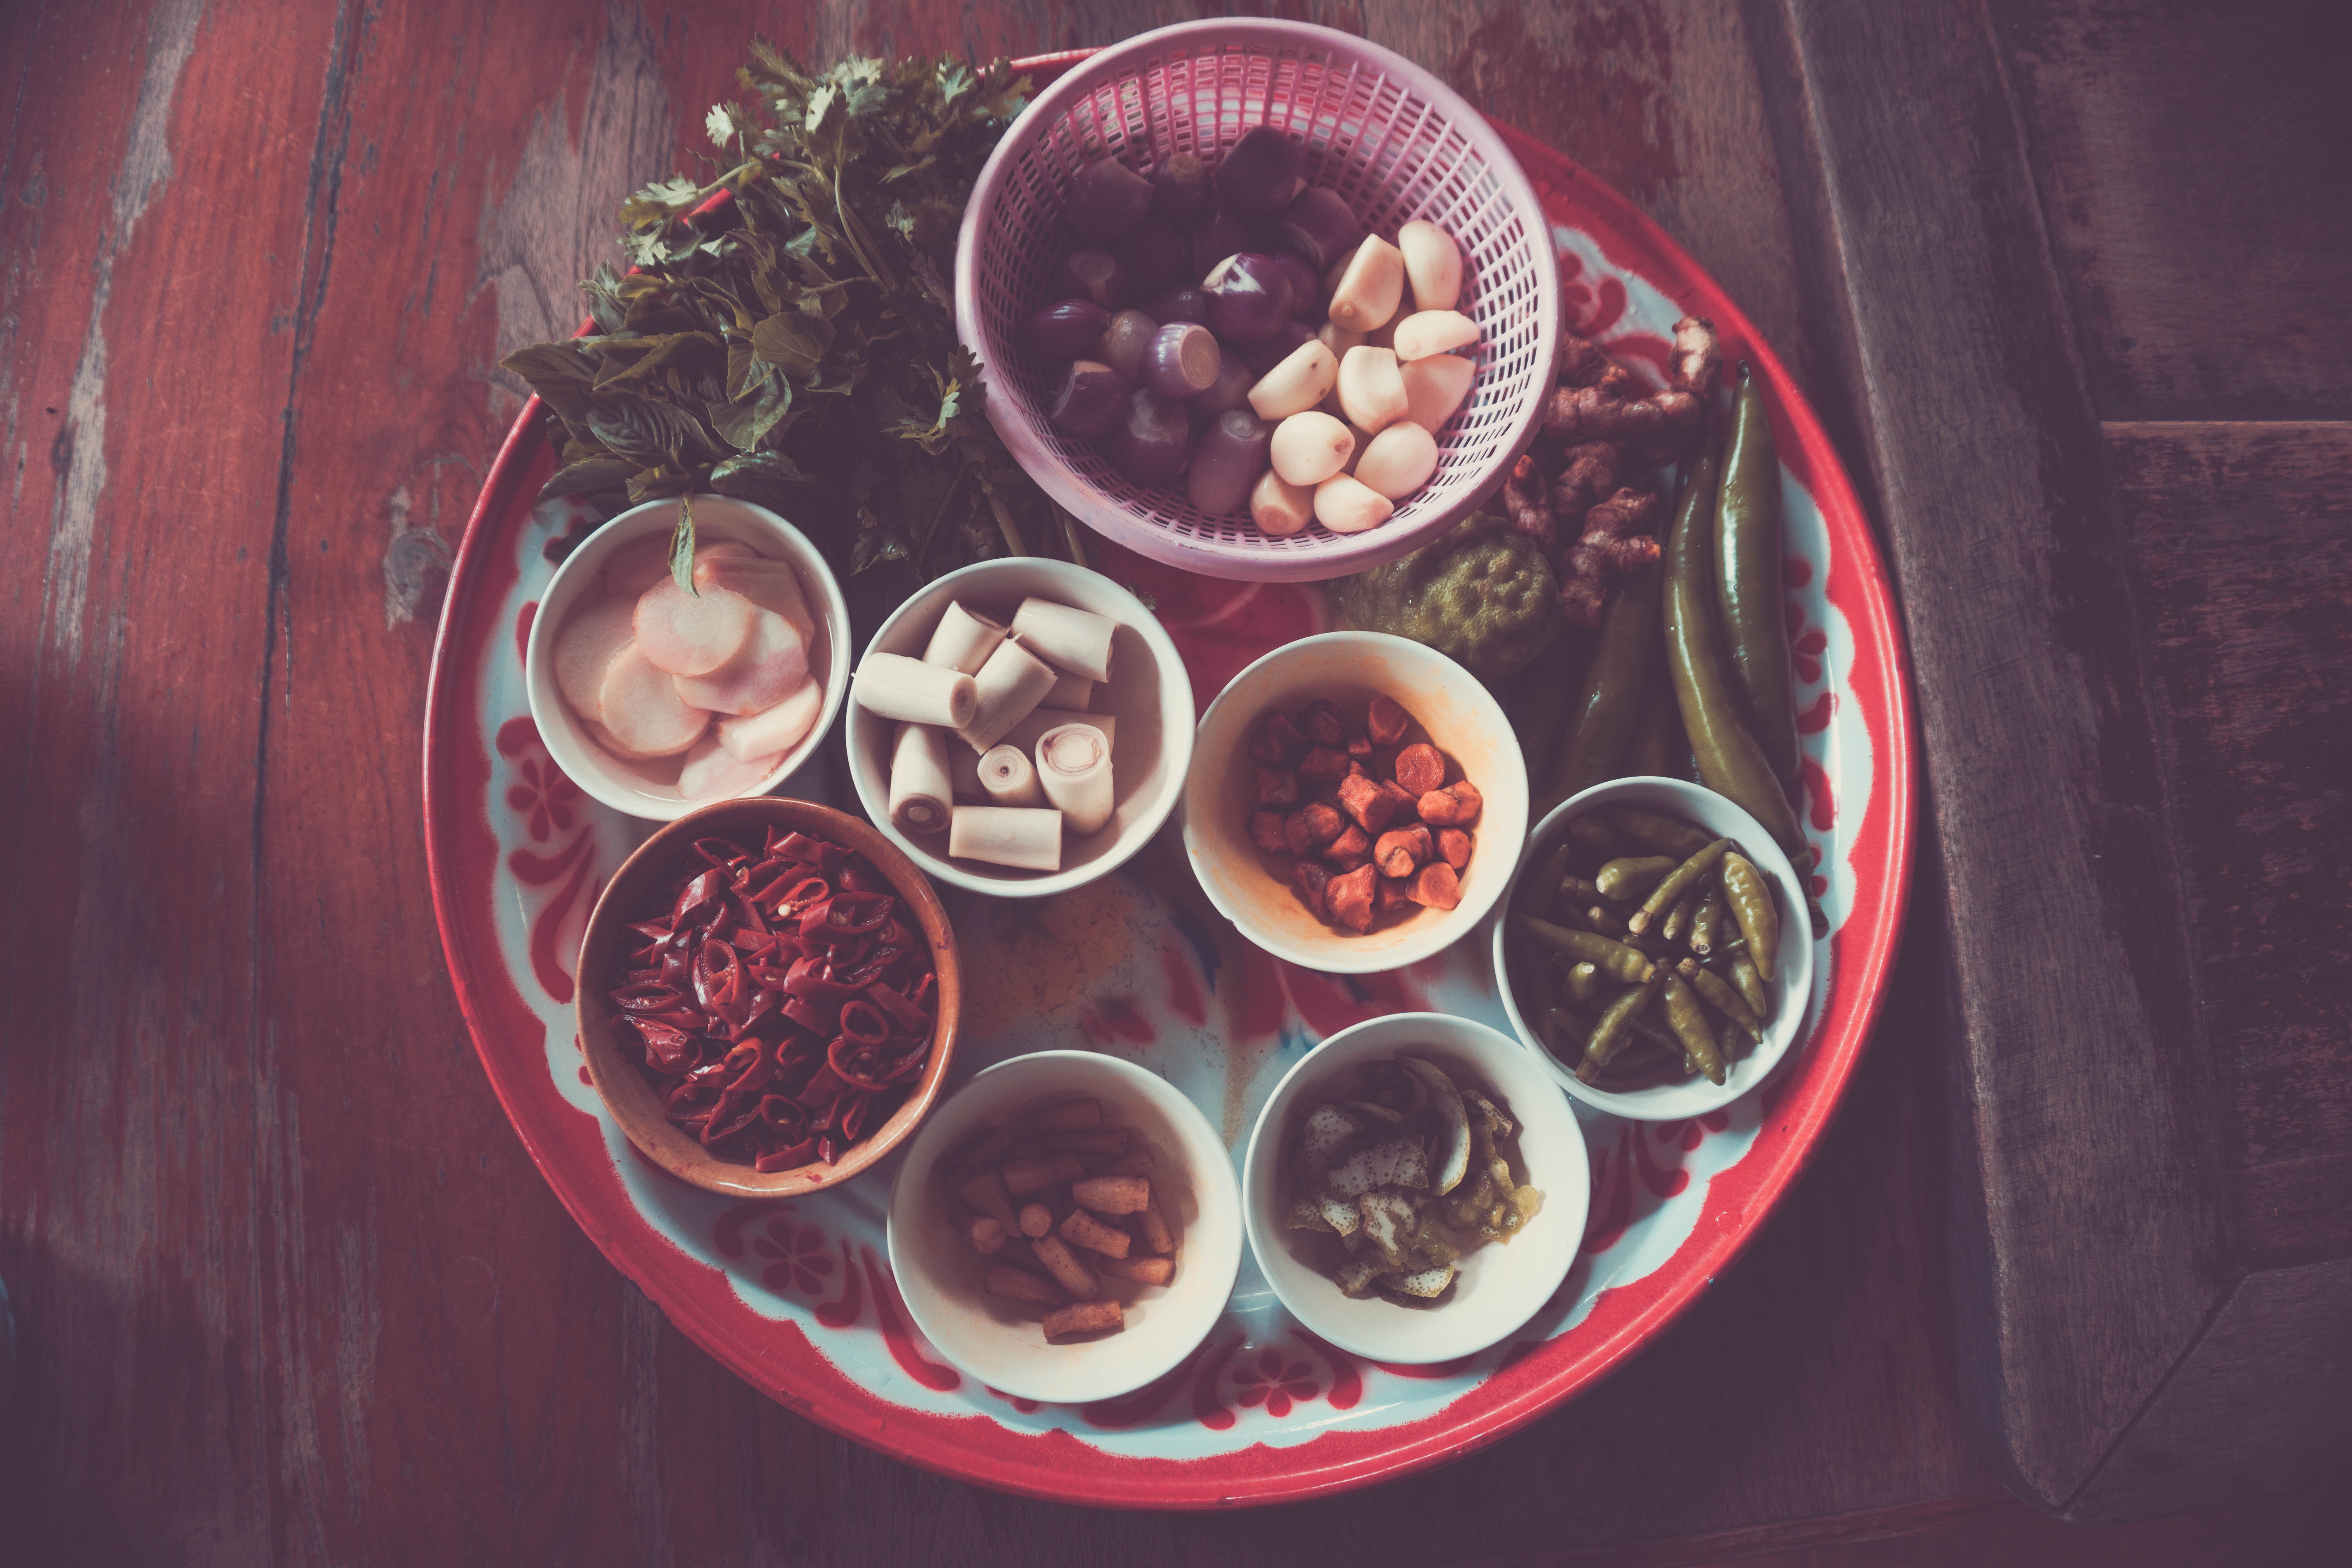 Assorted Spices on White and Red Plate on Brown Wooden Table, Bowls, Colors, Cooking, Healthy, HQ Photo